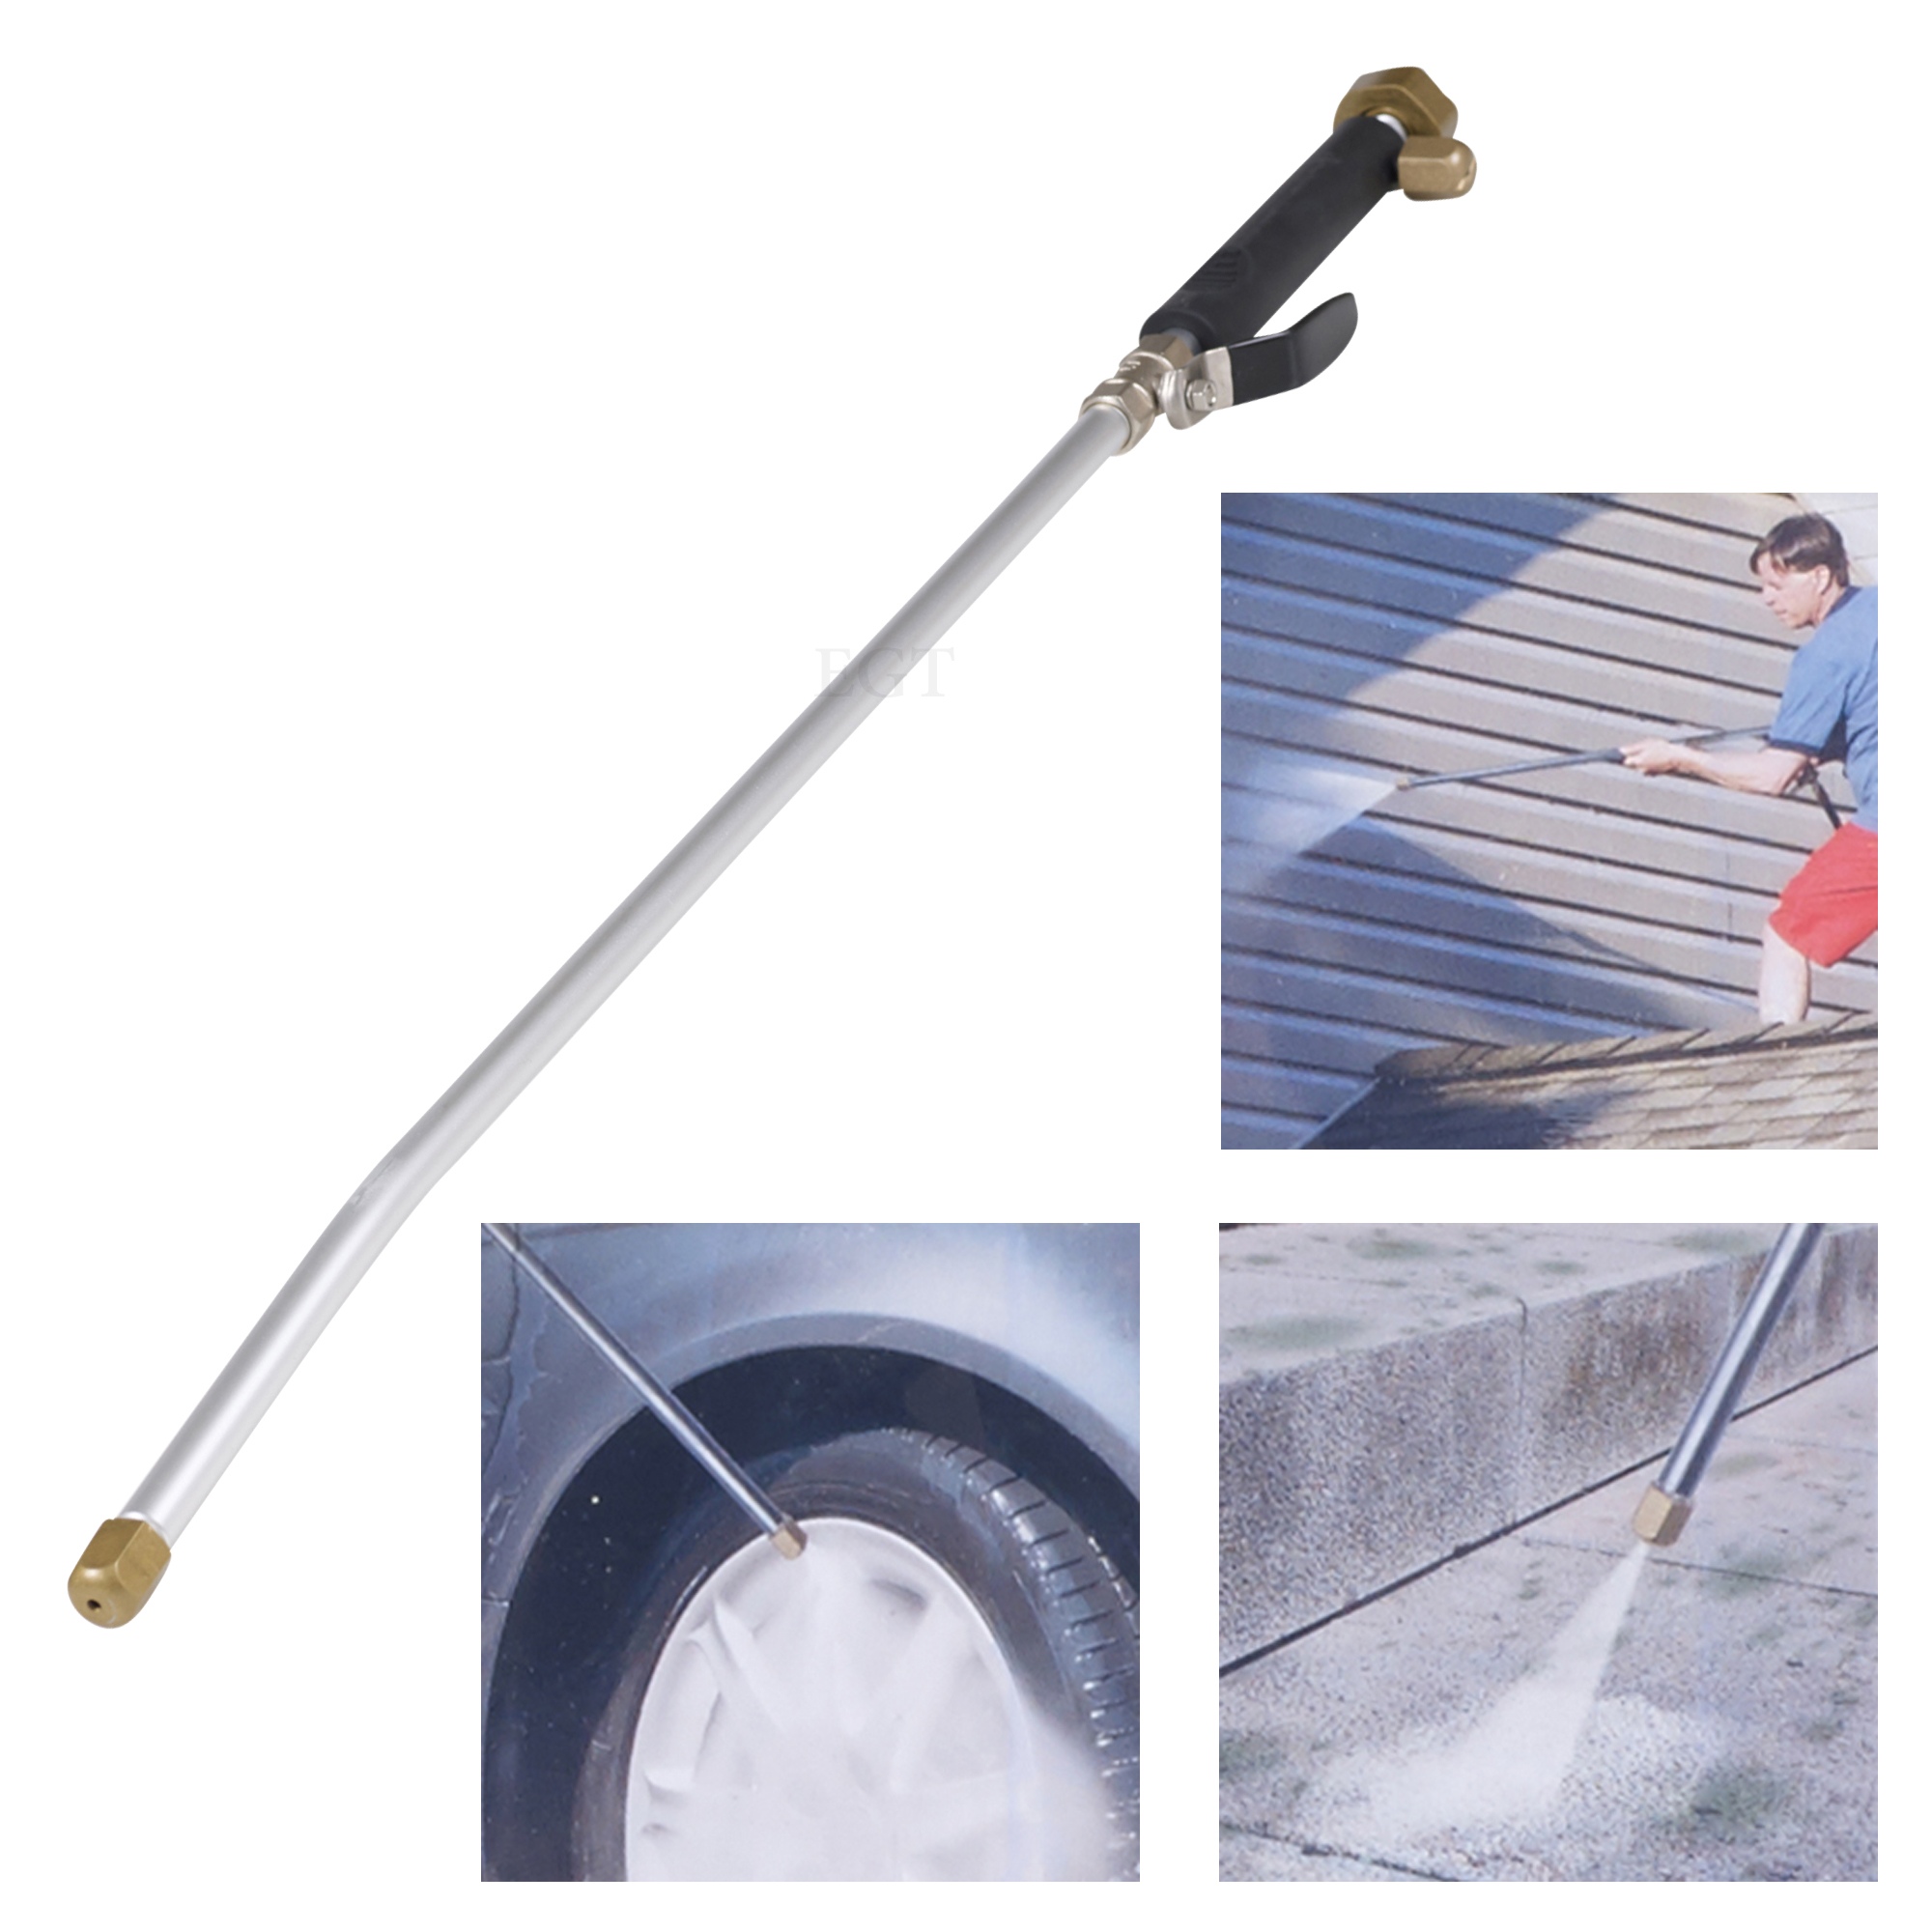 Expanding Hose Water Jet Power Washer High Pressure For Xhose Stretch Hose 